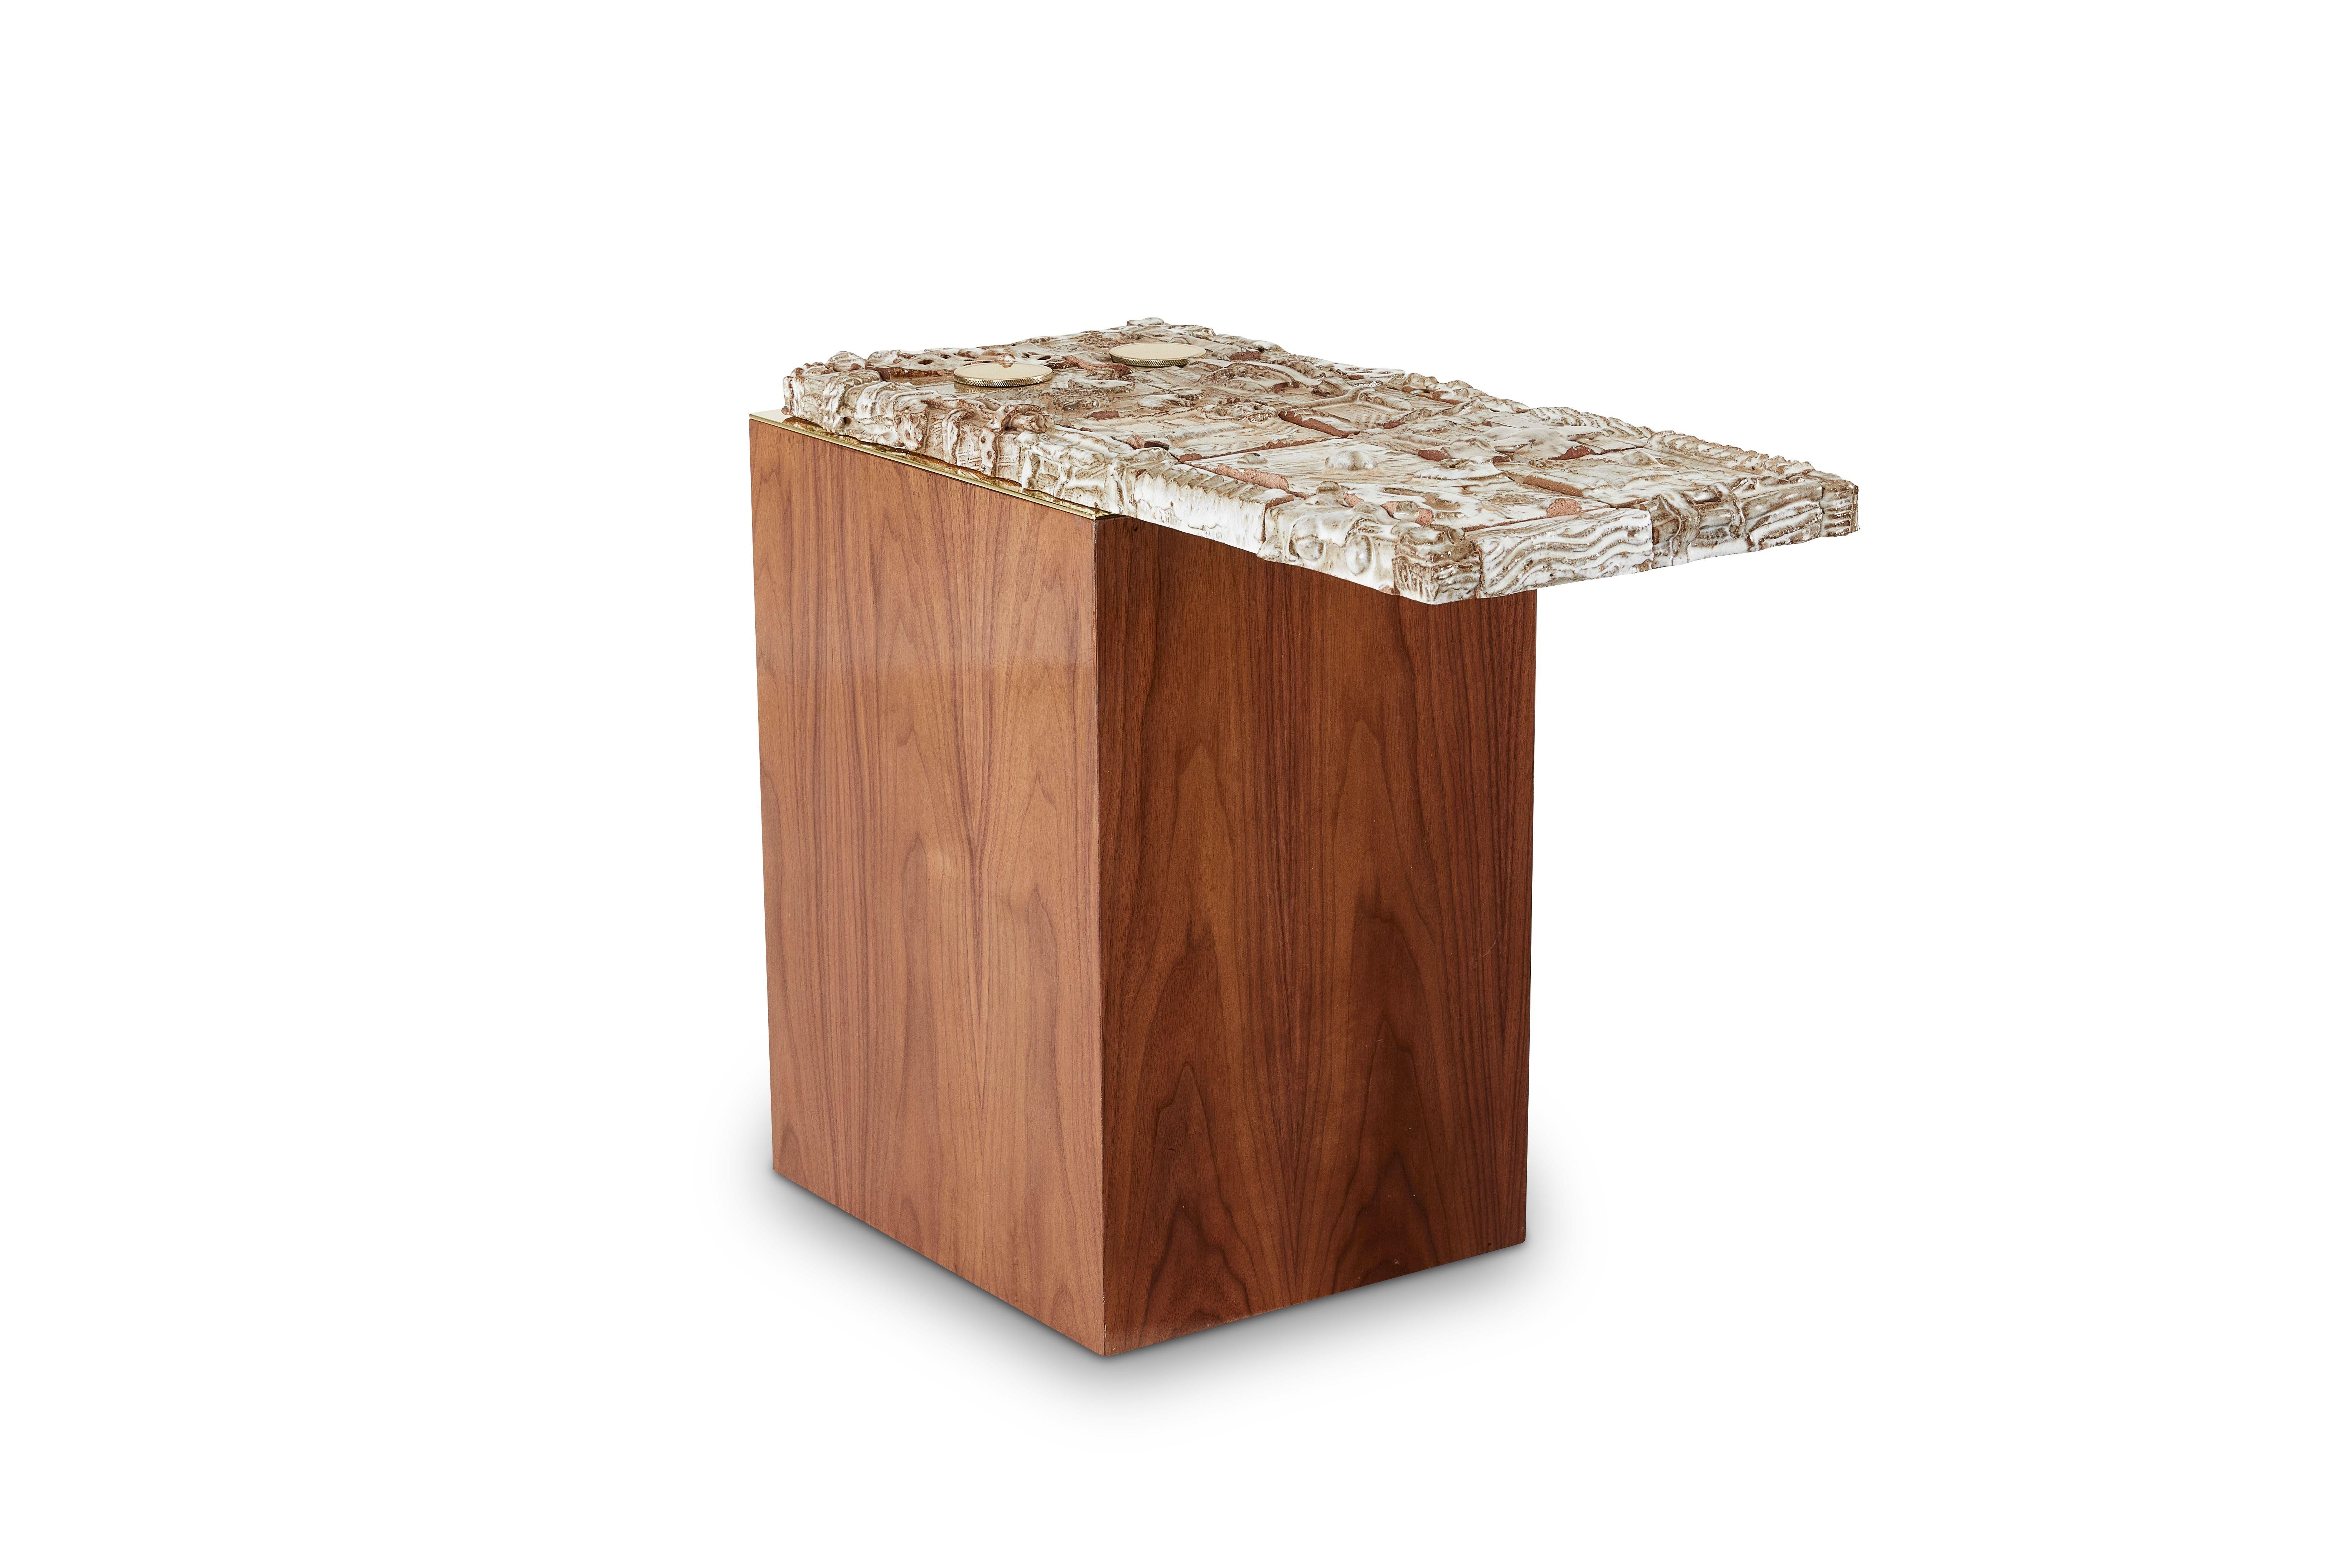 Stellar Float side table by Egg Designs
Dimensions: 75 L X 38.5 D X 56 H cm 
Materials: Walnut Timber, Handmade Ceramic, Polished Brass

Founded by South Africans and life partners, Greg and Roche Dry - Egg is a unique perspective in